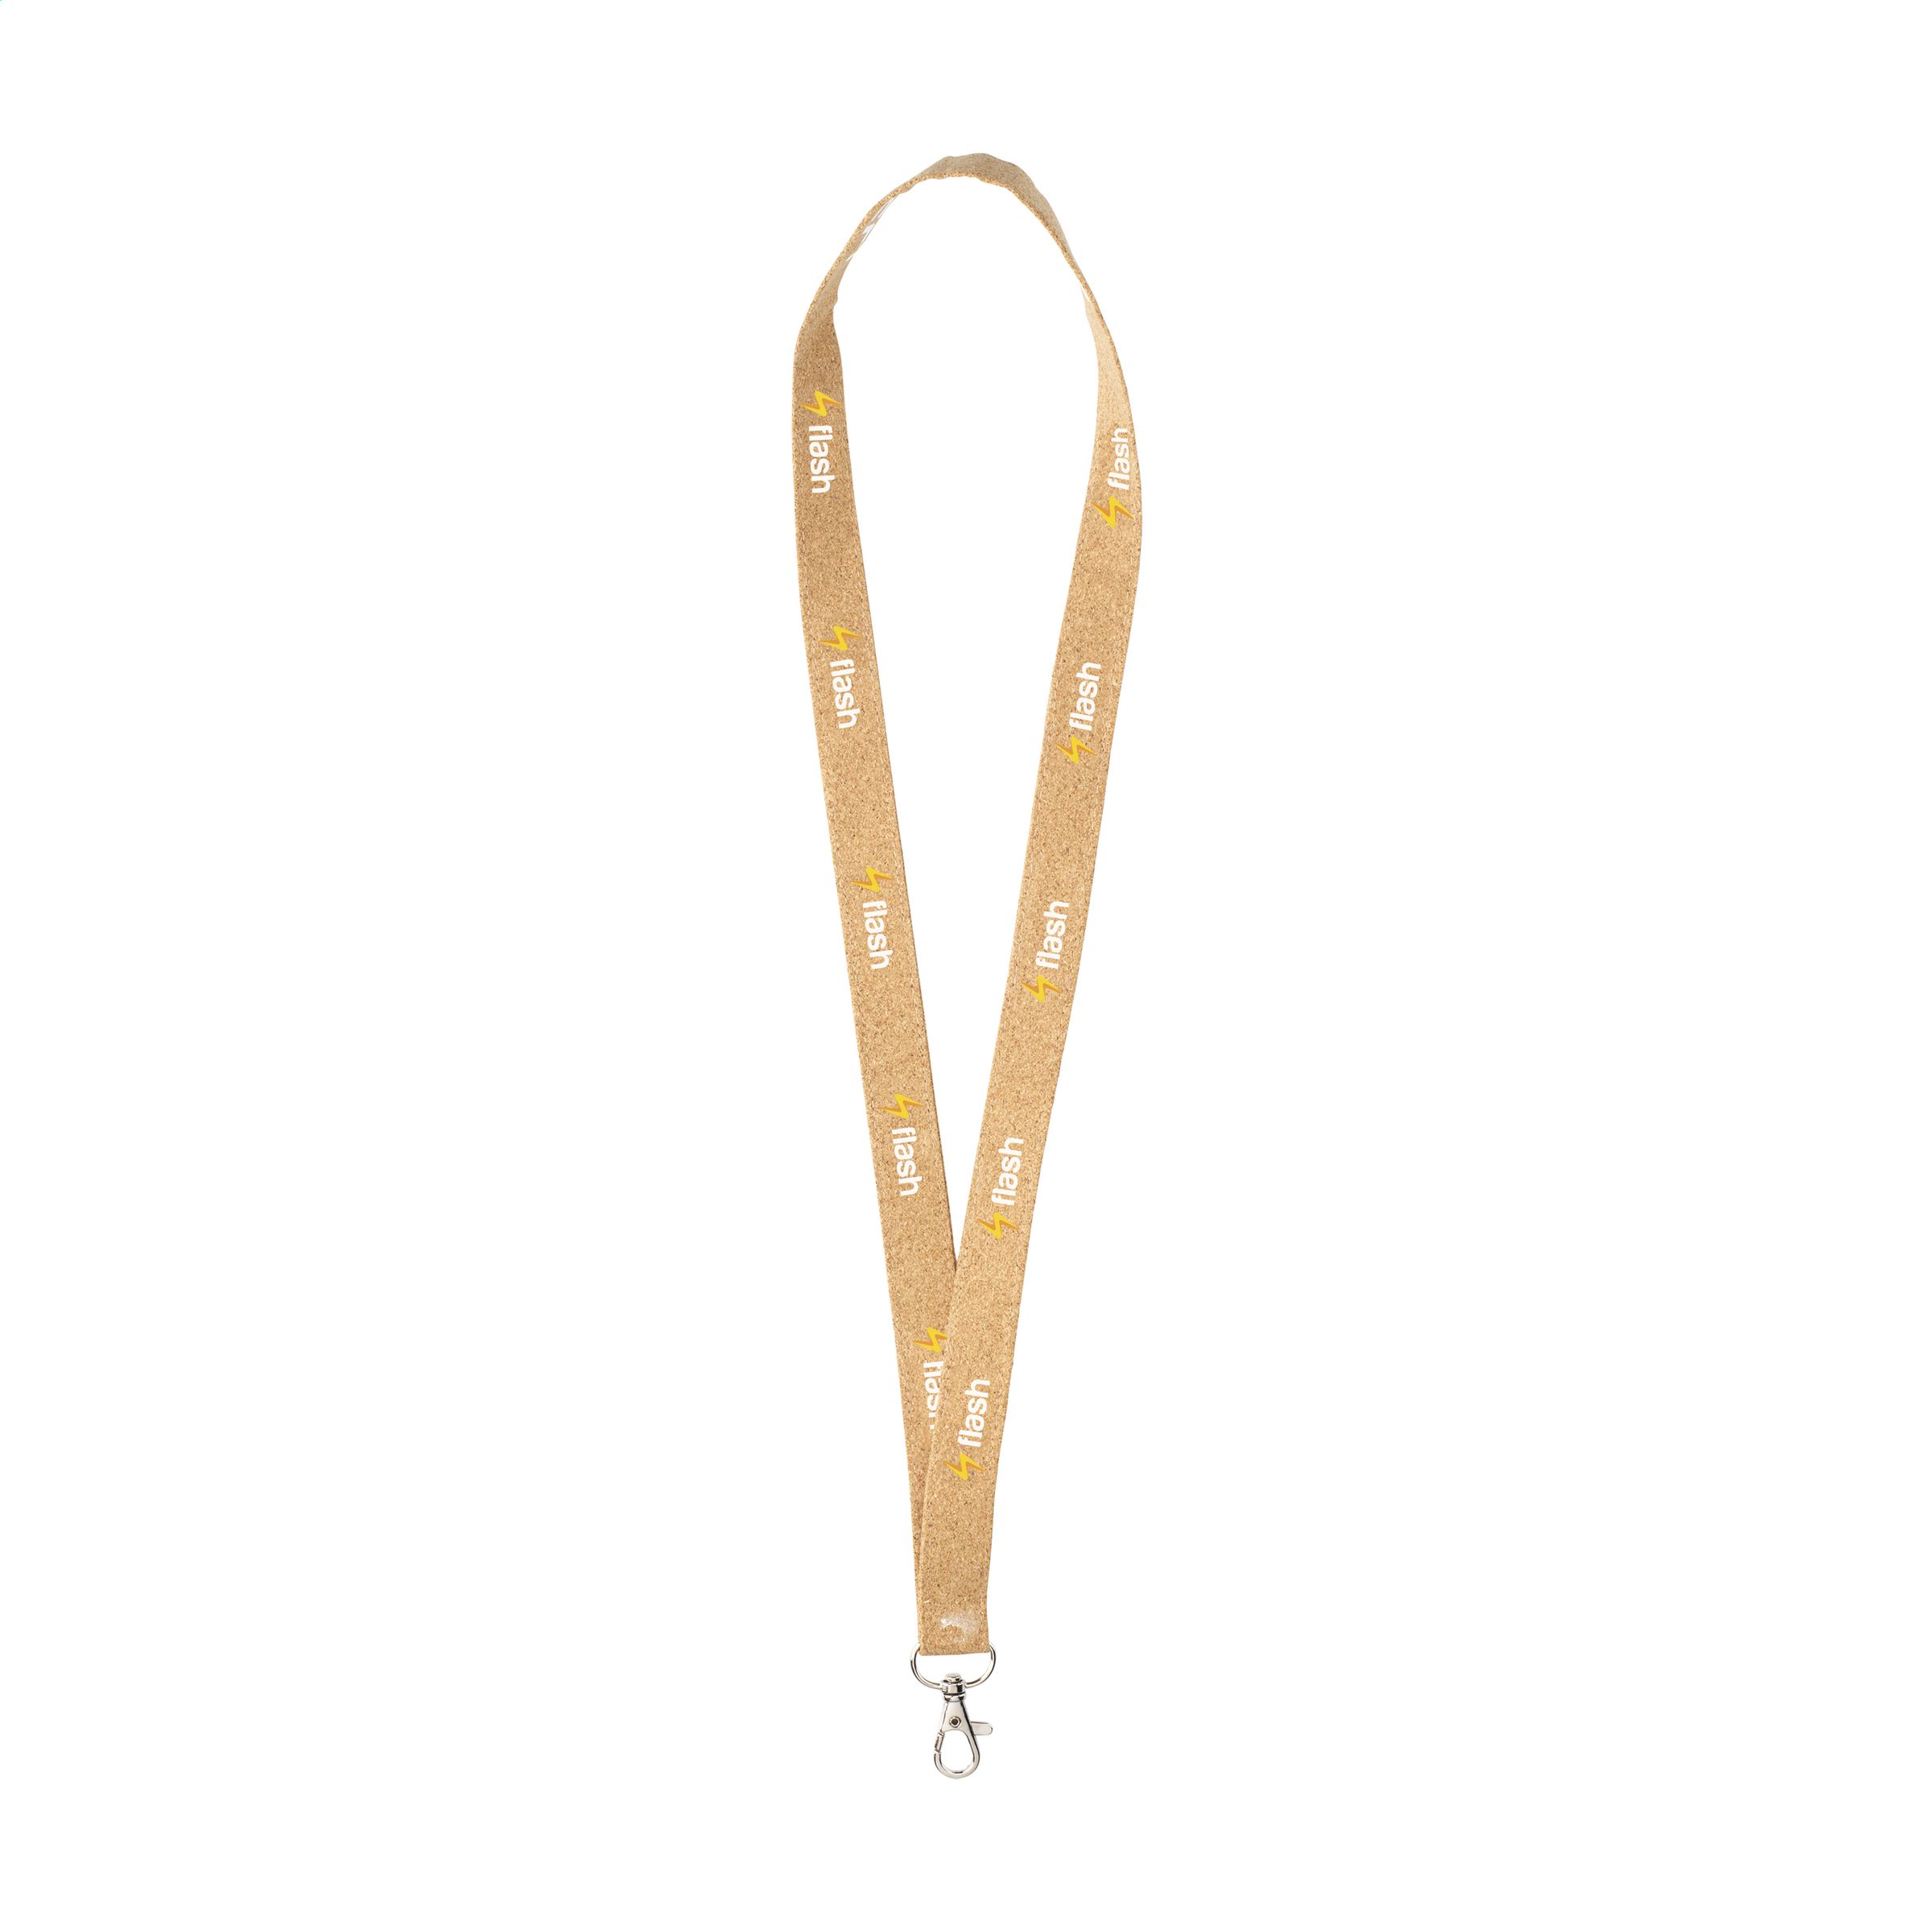 Easier to carry, cork lanyard is a practical and fashionable accessory. It is typically used to hold items such as keys, ID cards, and badges. The cord is made from cork which is both lightweight and durable. It is an eco-friendly choice as cork is a sustainable material. It can be comfortably worn around the neck, and the attached clip makes it easy to attach and detach items. - Altcar